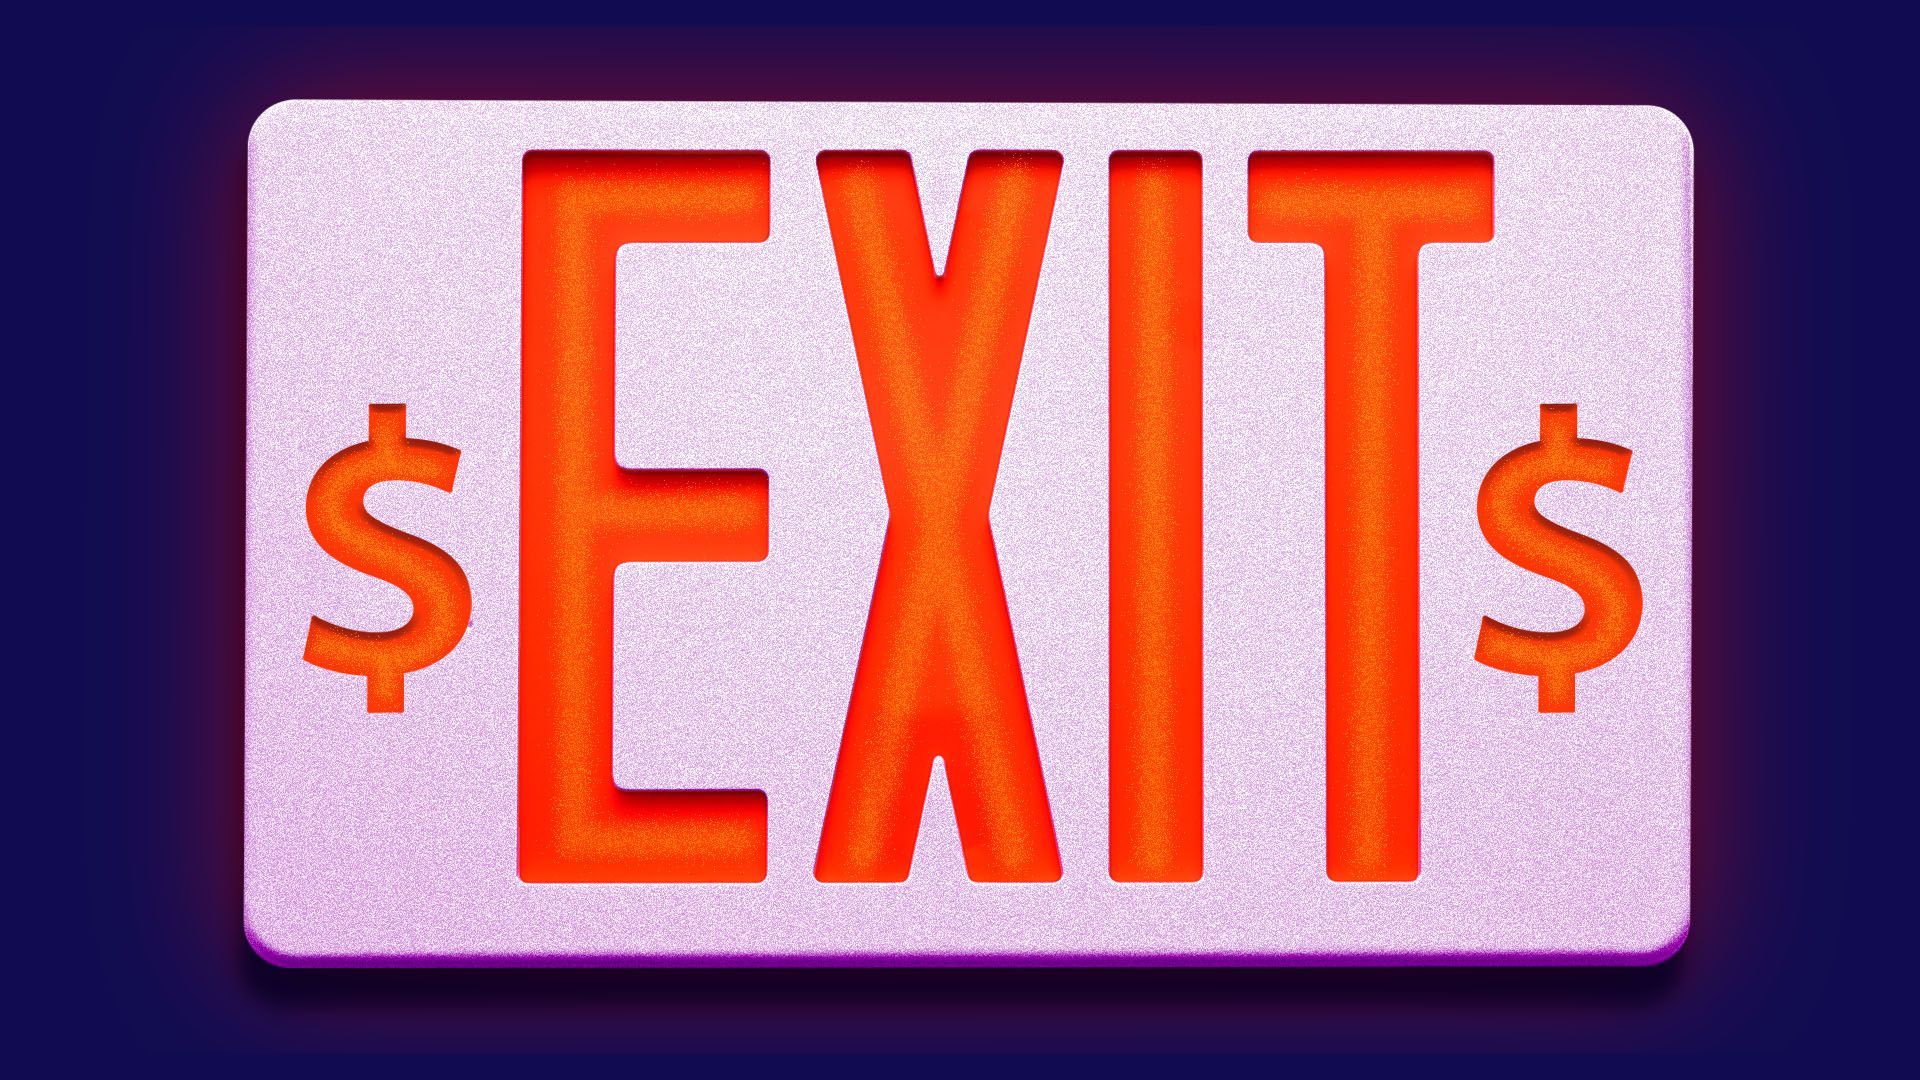 Illustration of an exit sign with dollar bills on it